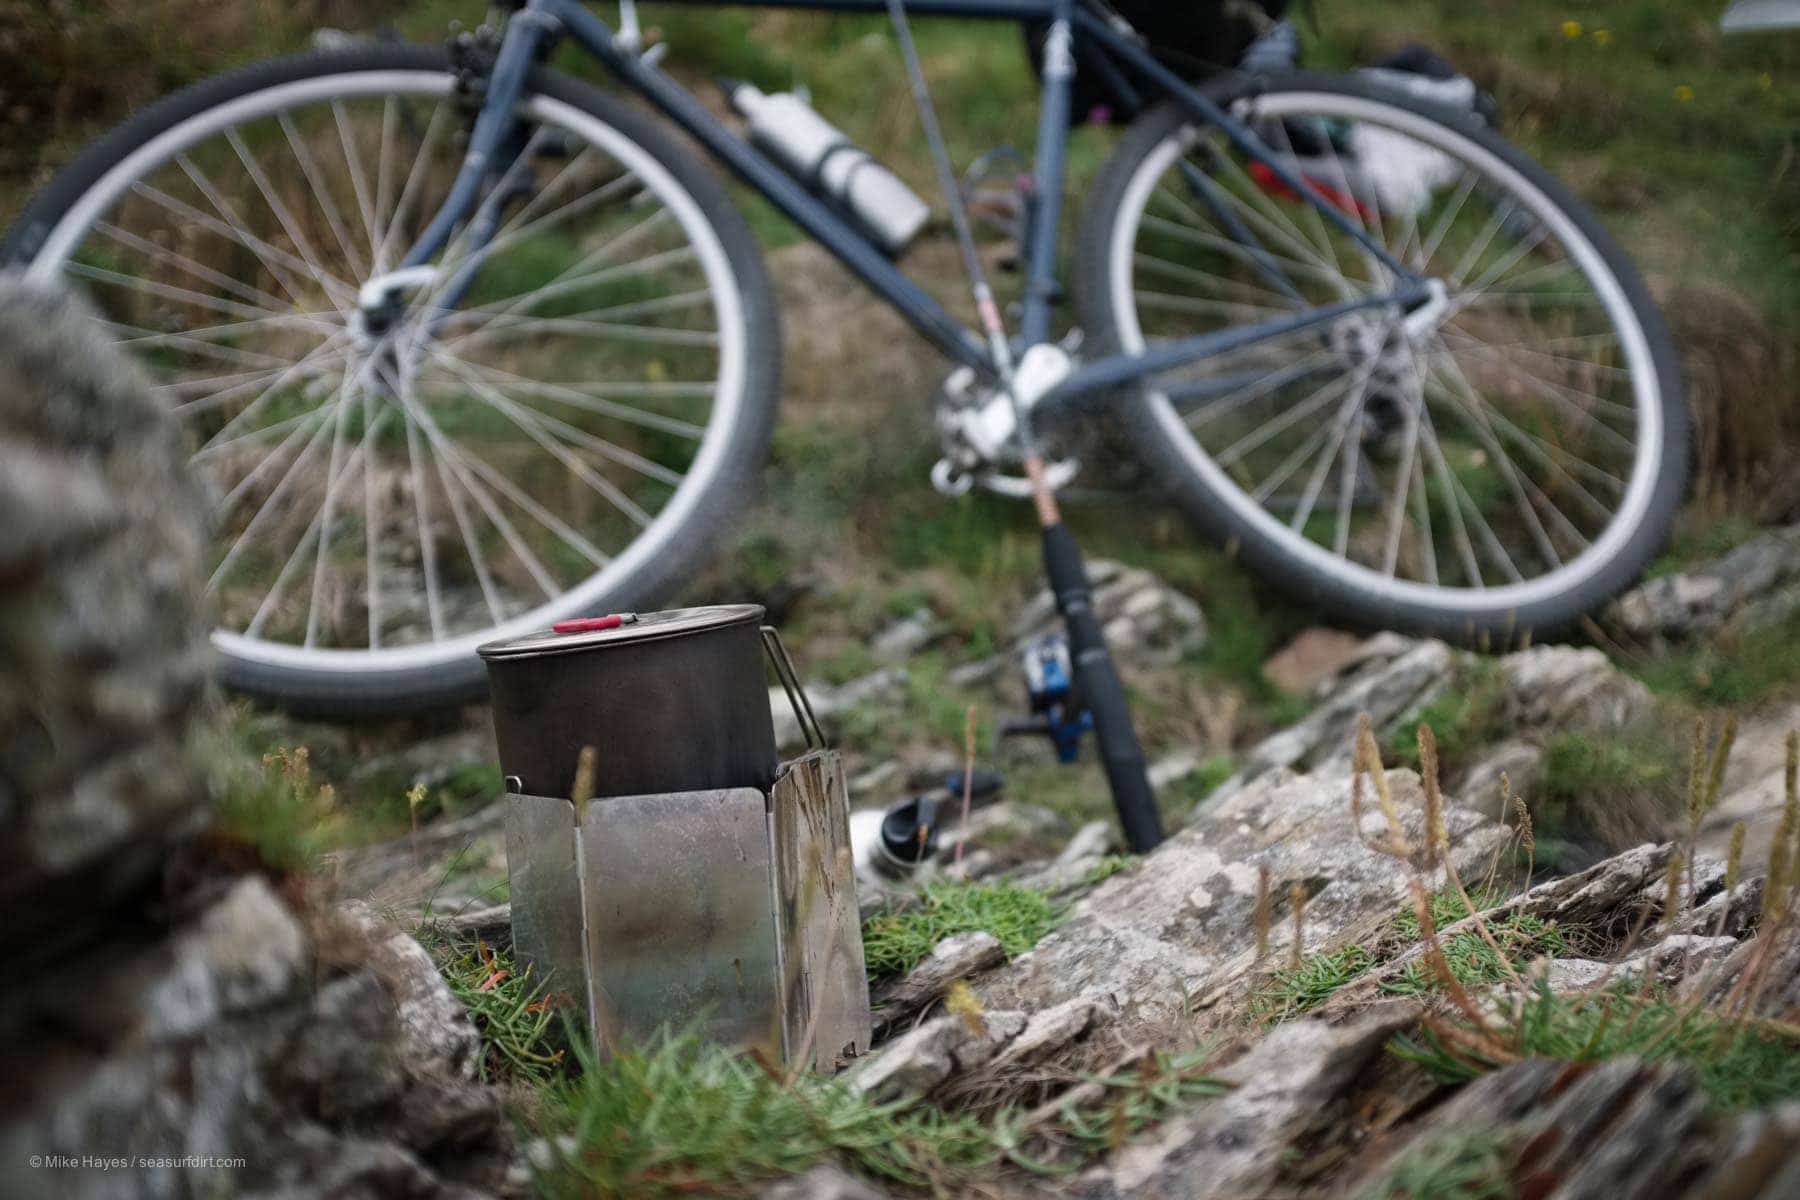 camping stove making tea with a bicycle and fishing rod in the background